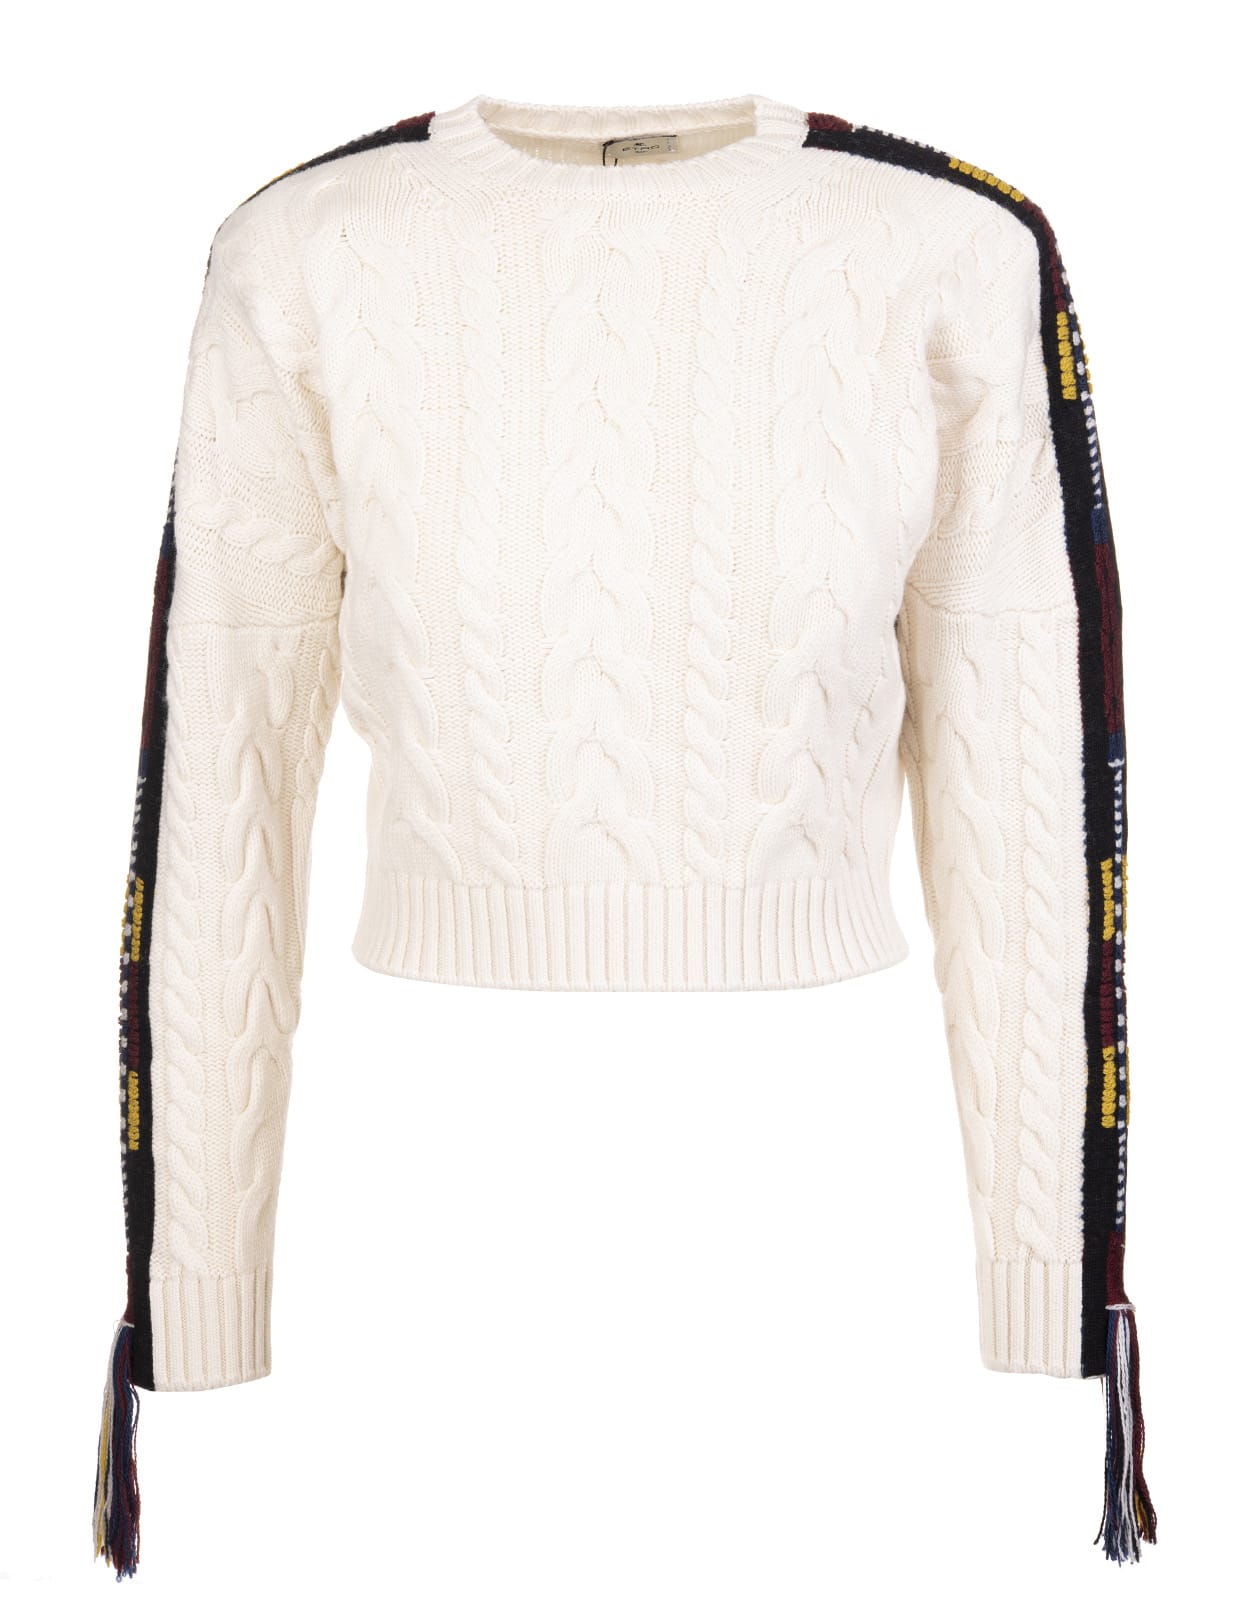 Etro Woman White Cable Knit With Jacquard Ribbons And Tassels